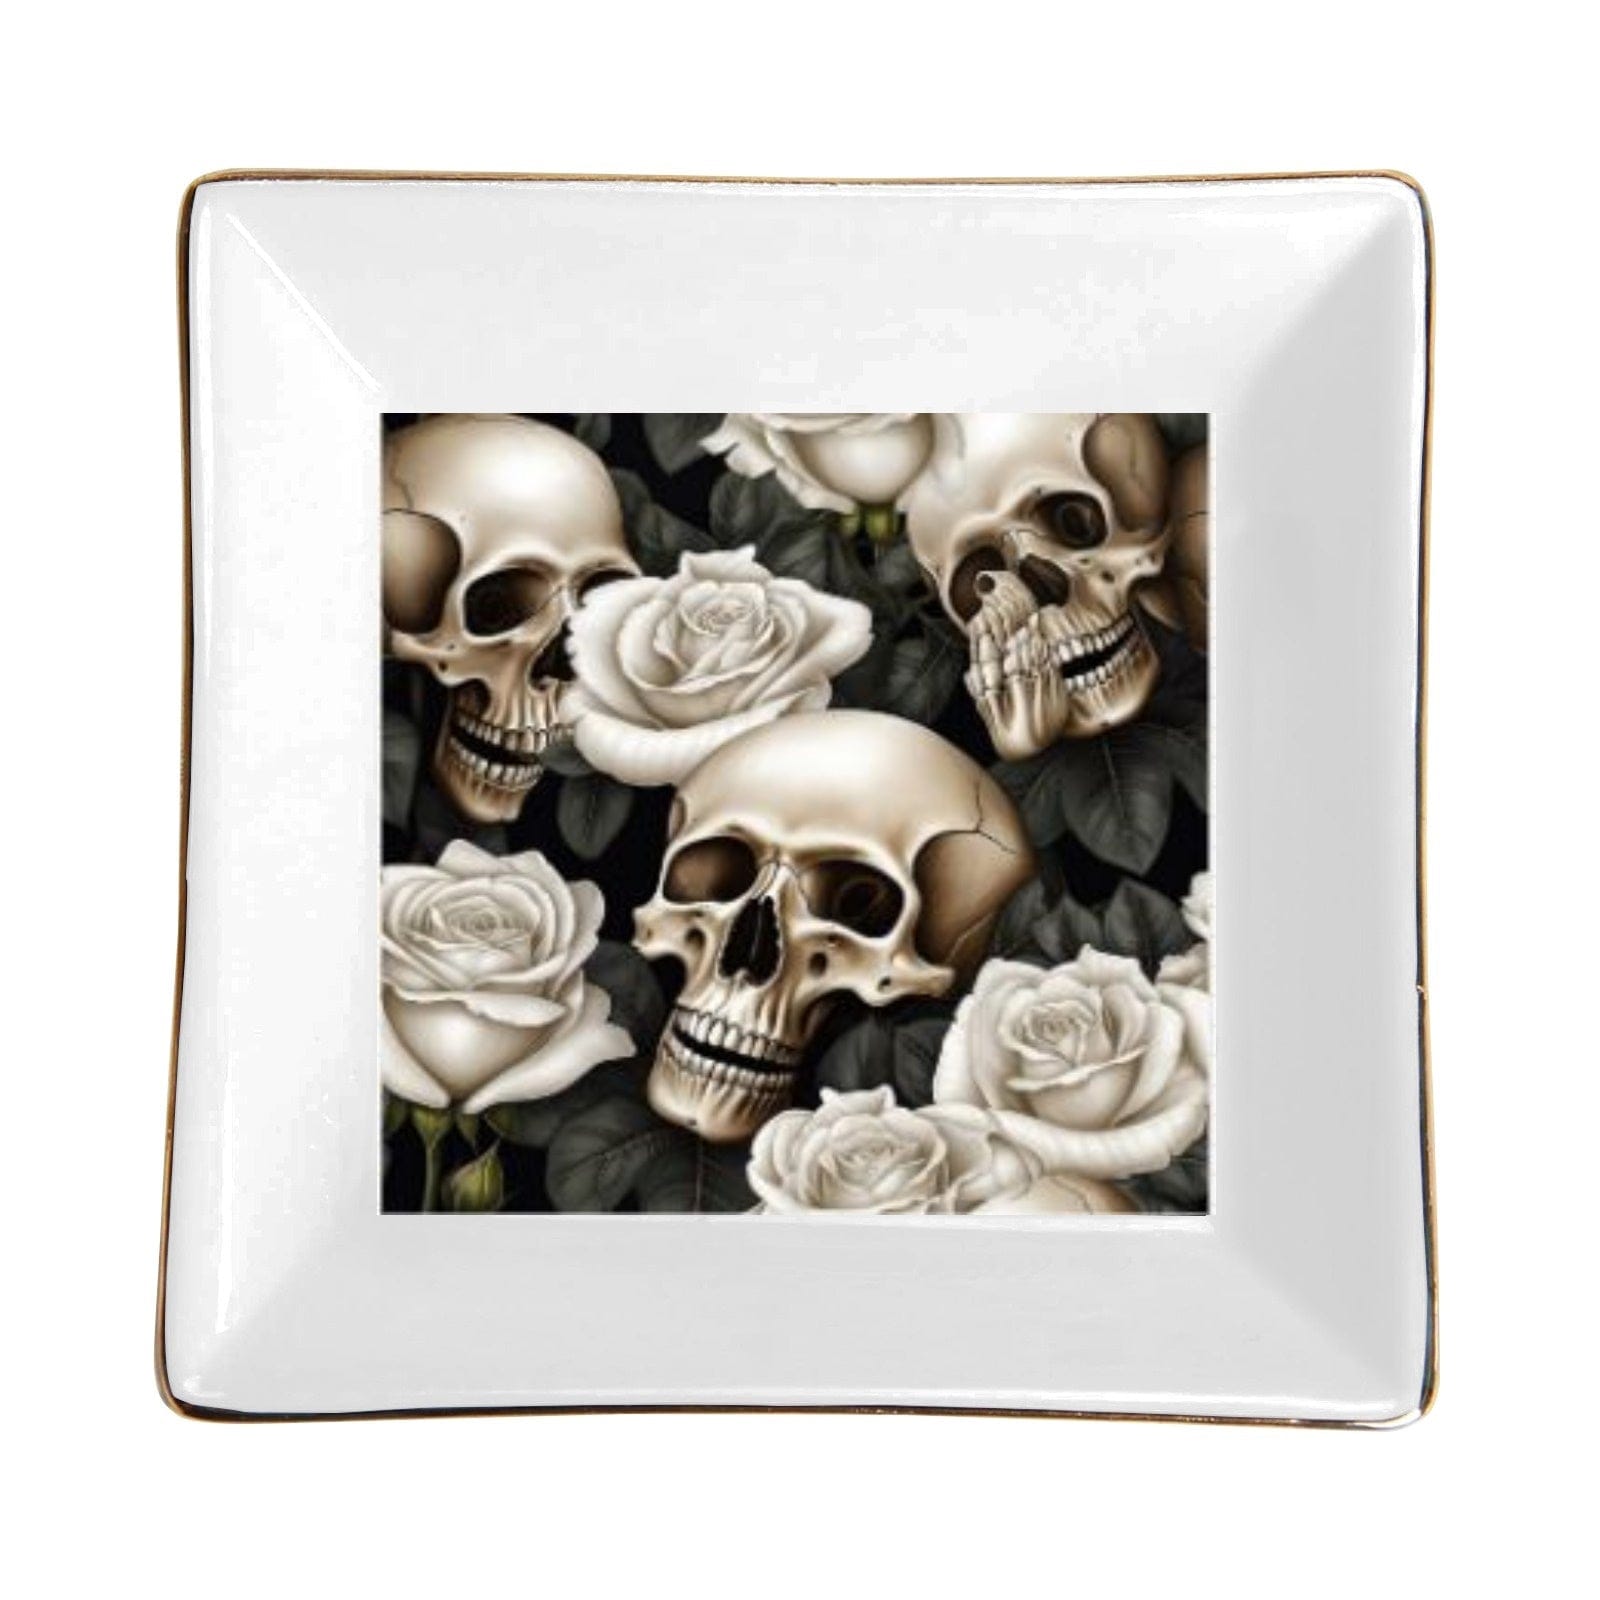 This Skulls & Roses Soap Dish Will Add A Touch Of Luxury To Your Bathroom